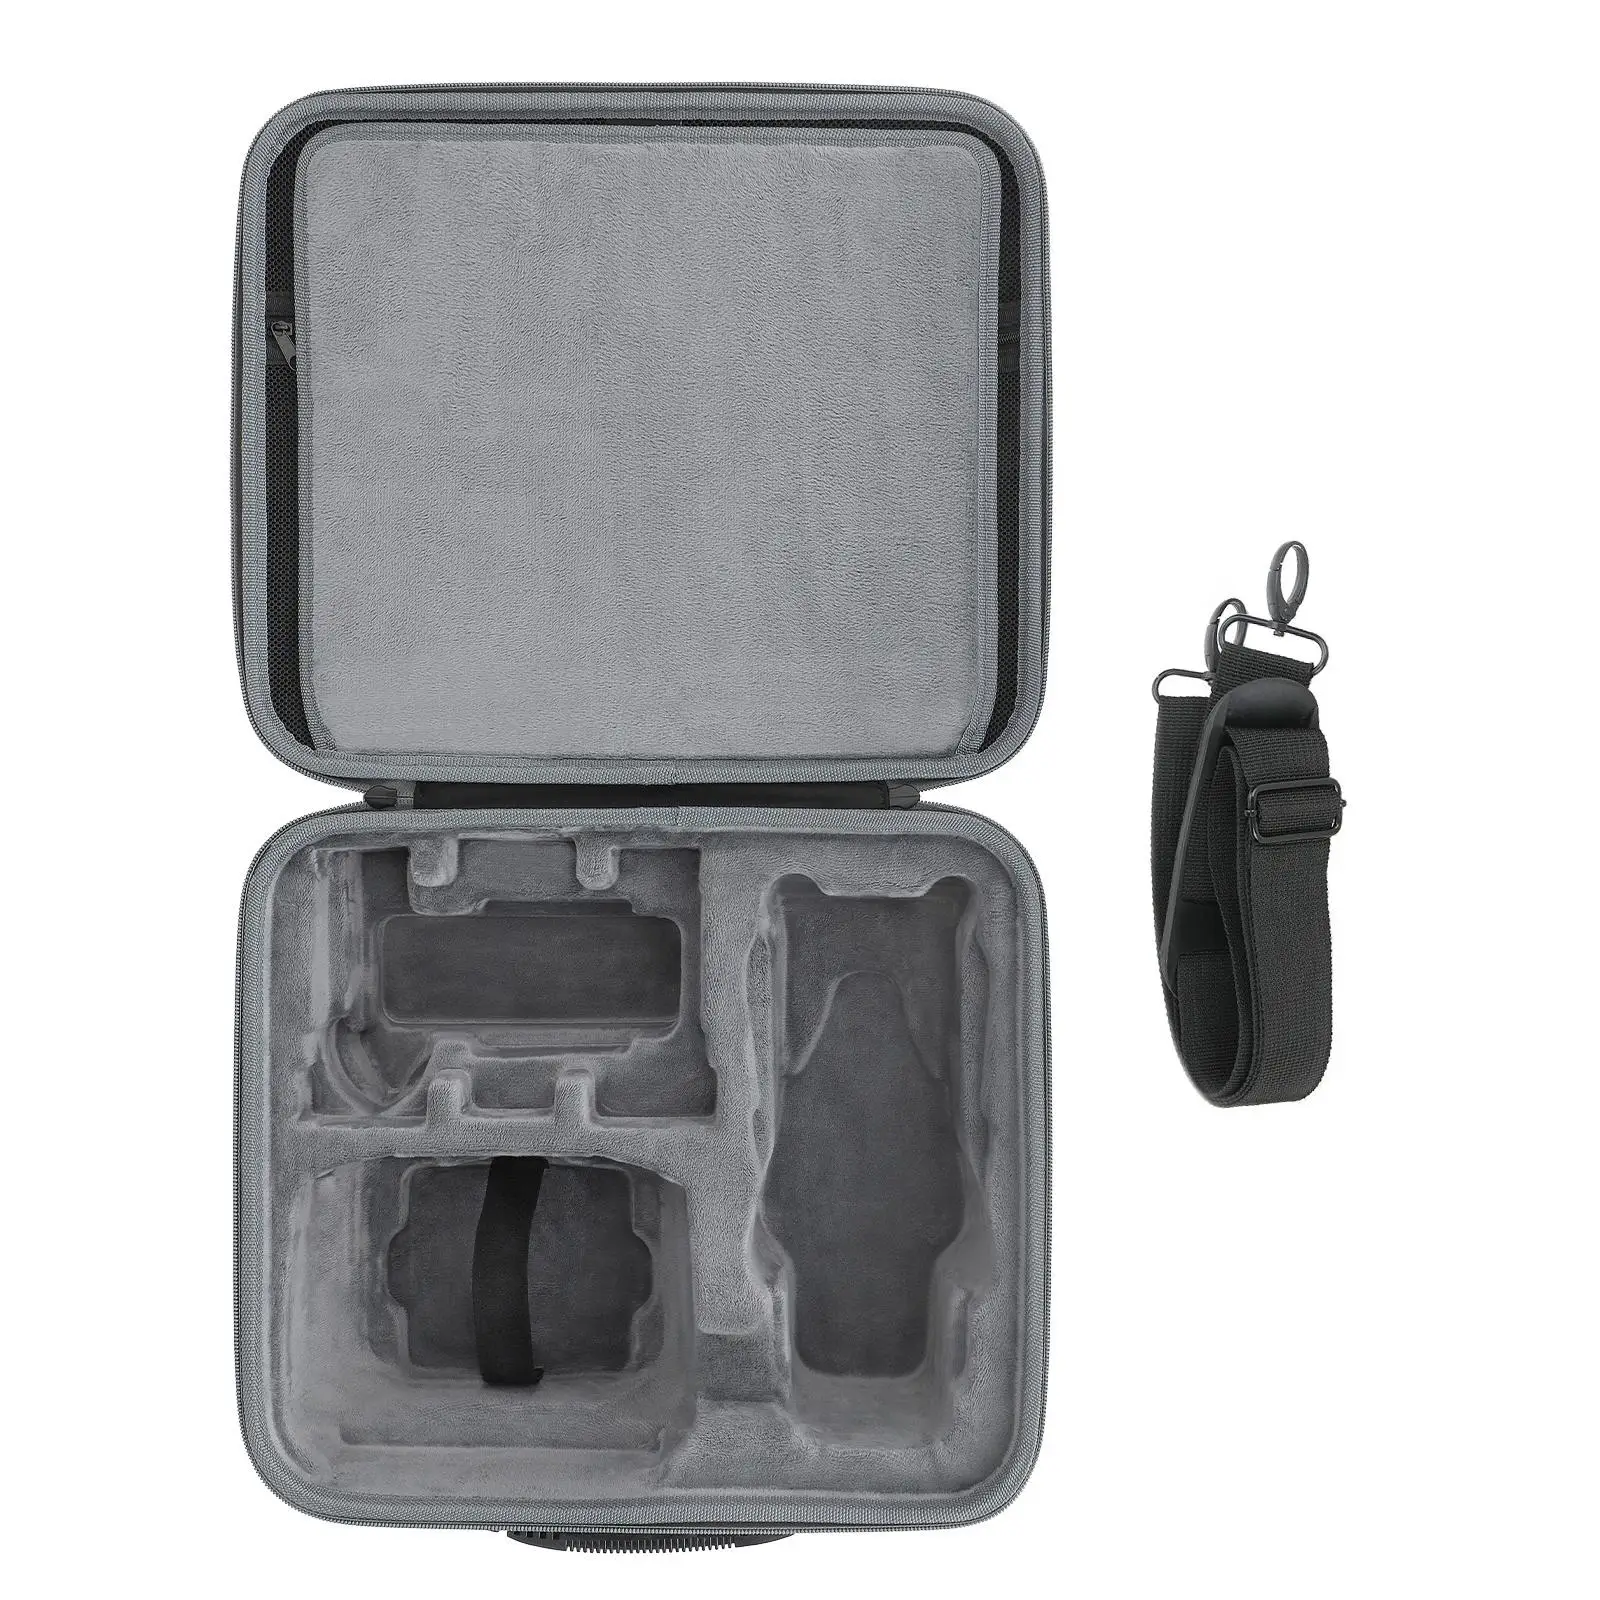 Carrying Case Comfortable Handle Hard Protective Case for Mavic 3 Pro Mavic 3 Classic Helicopter Remote Controller Quadcopter